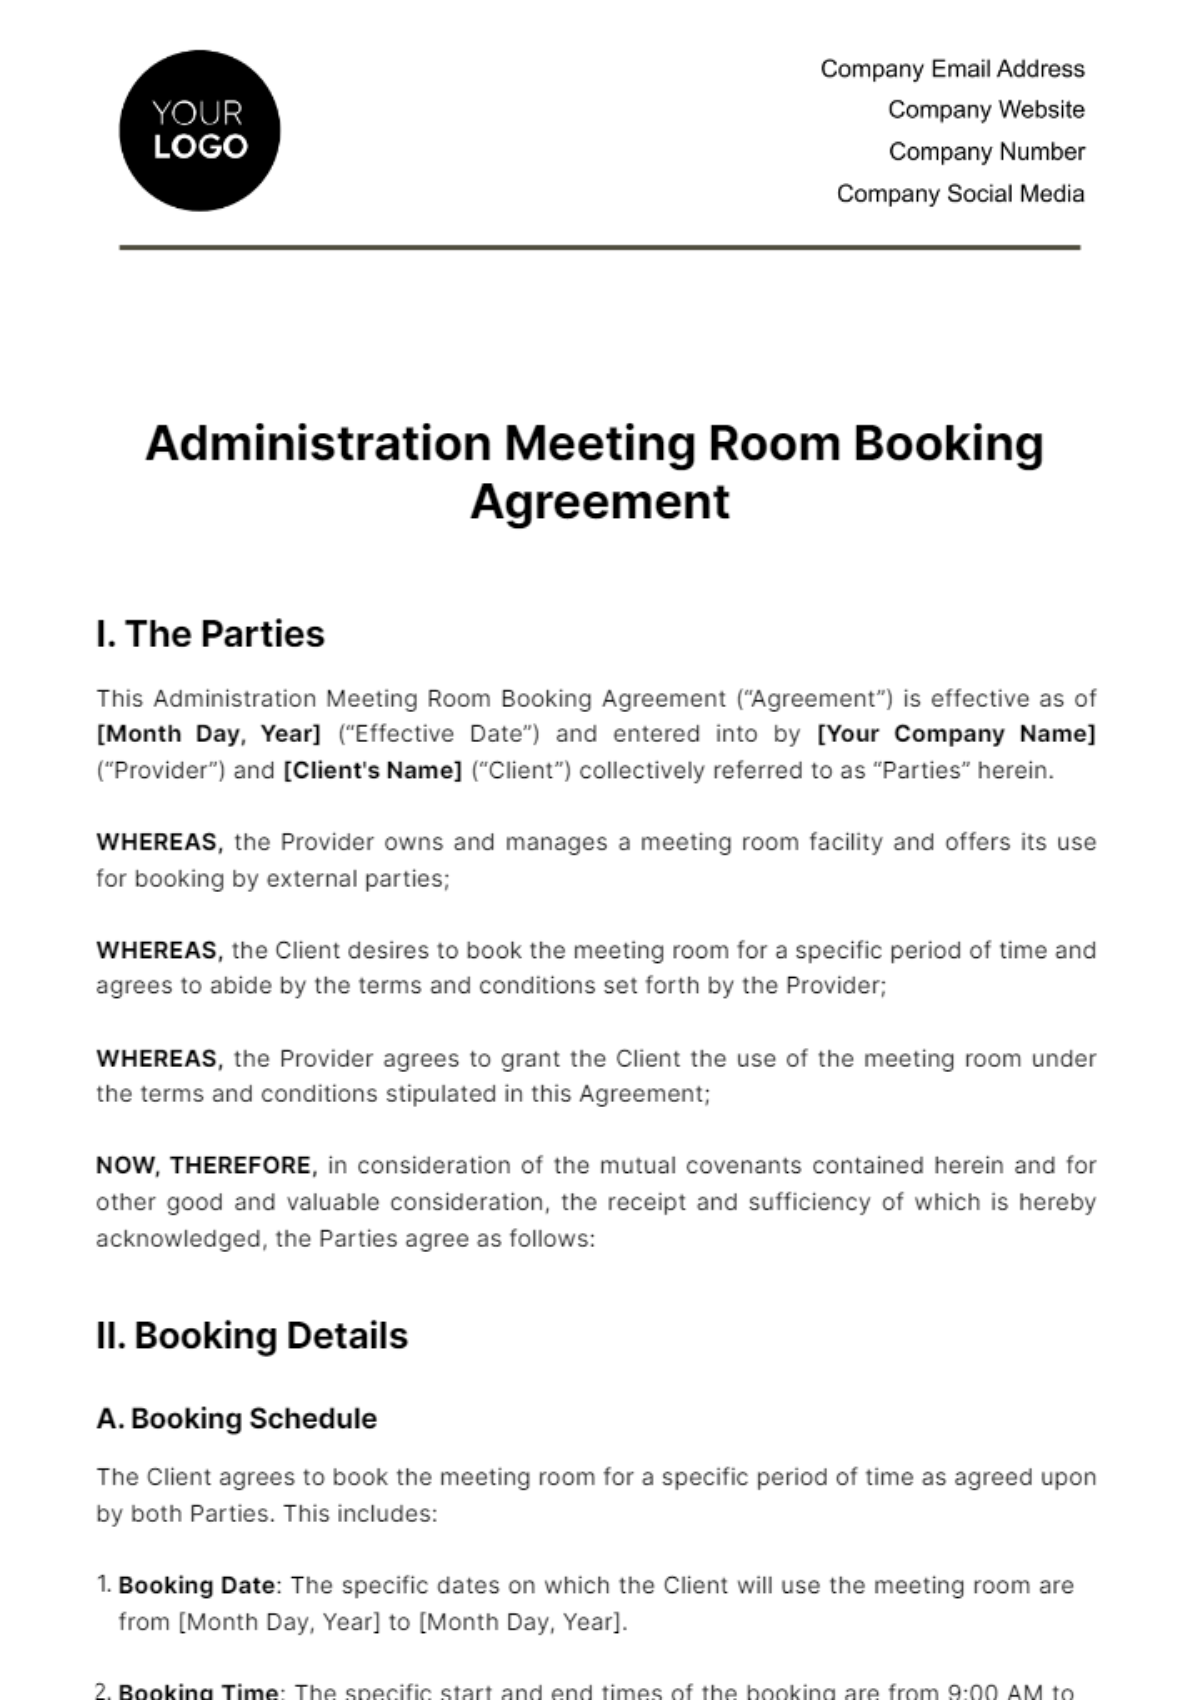 Administration Meeting Room Booking Agreement Template